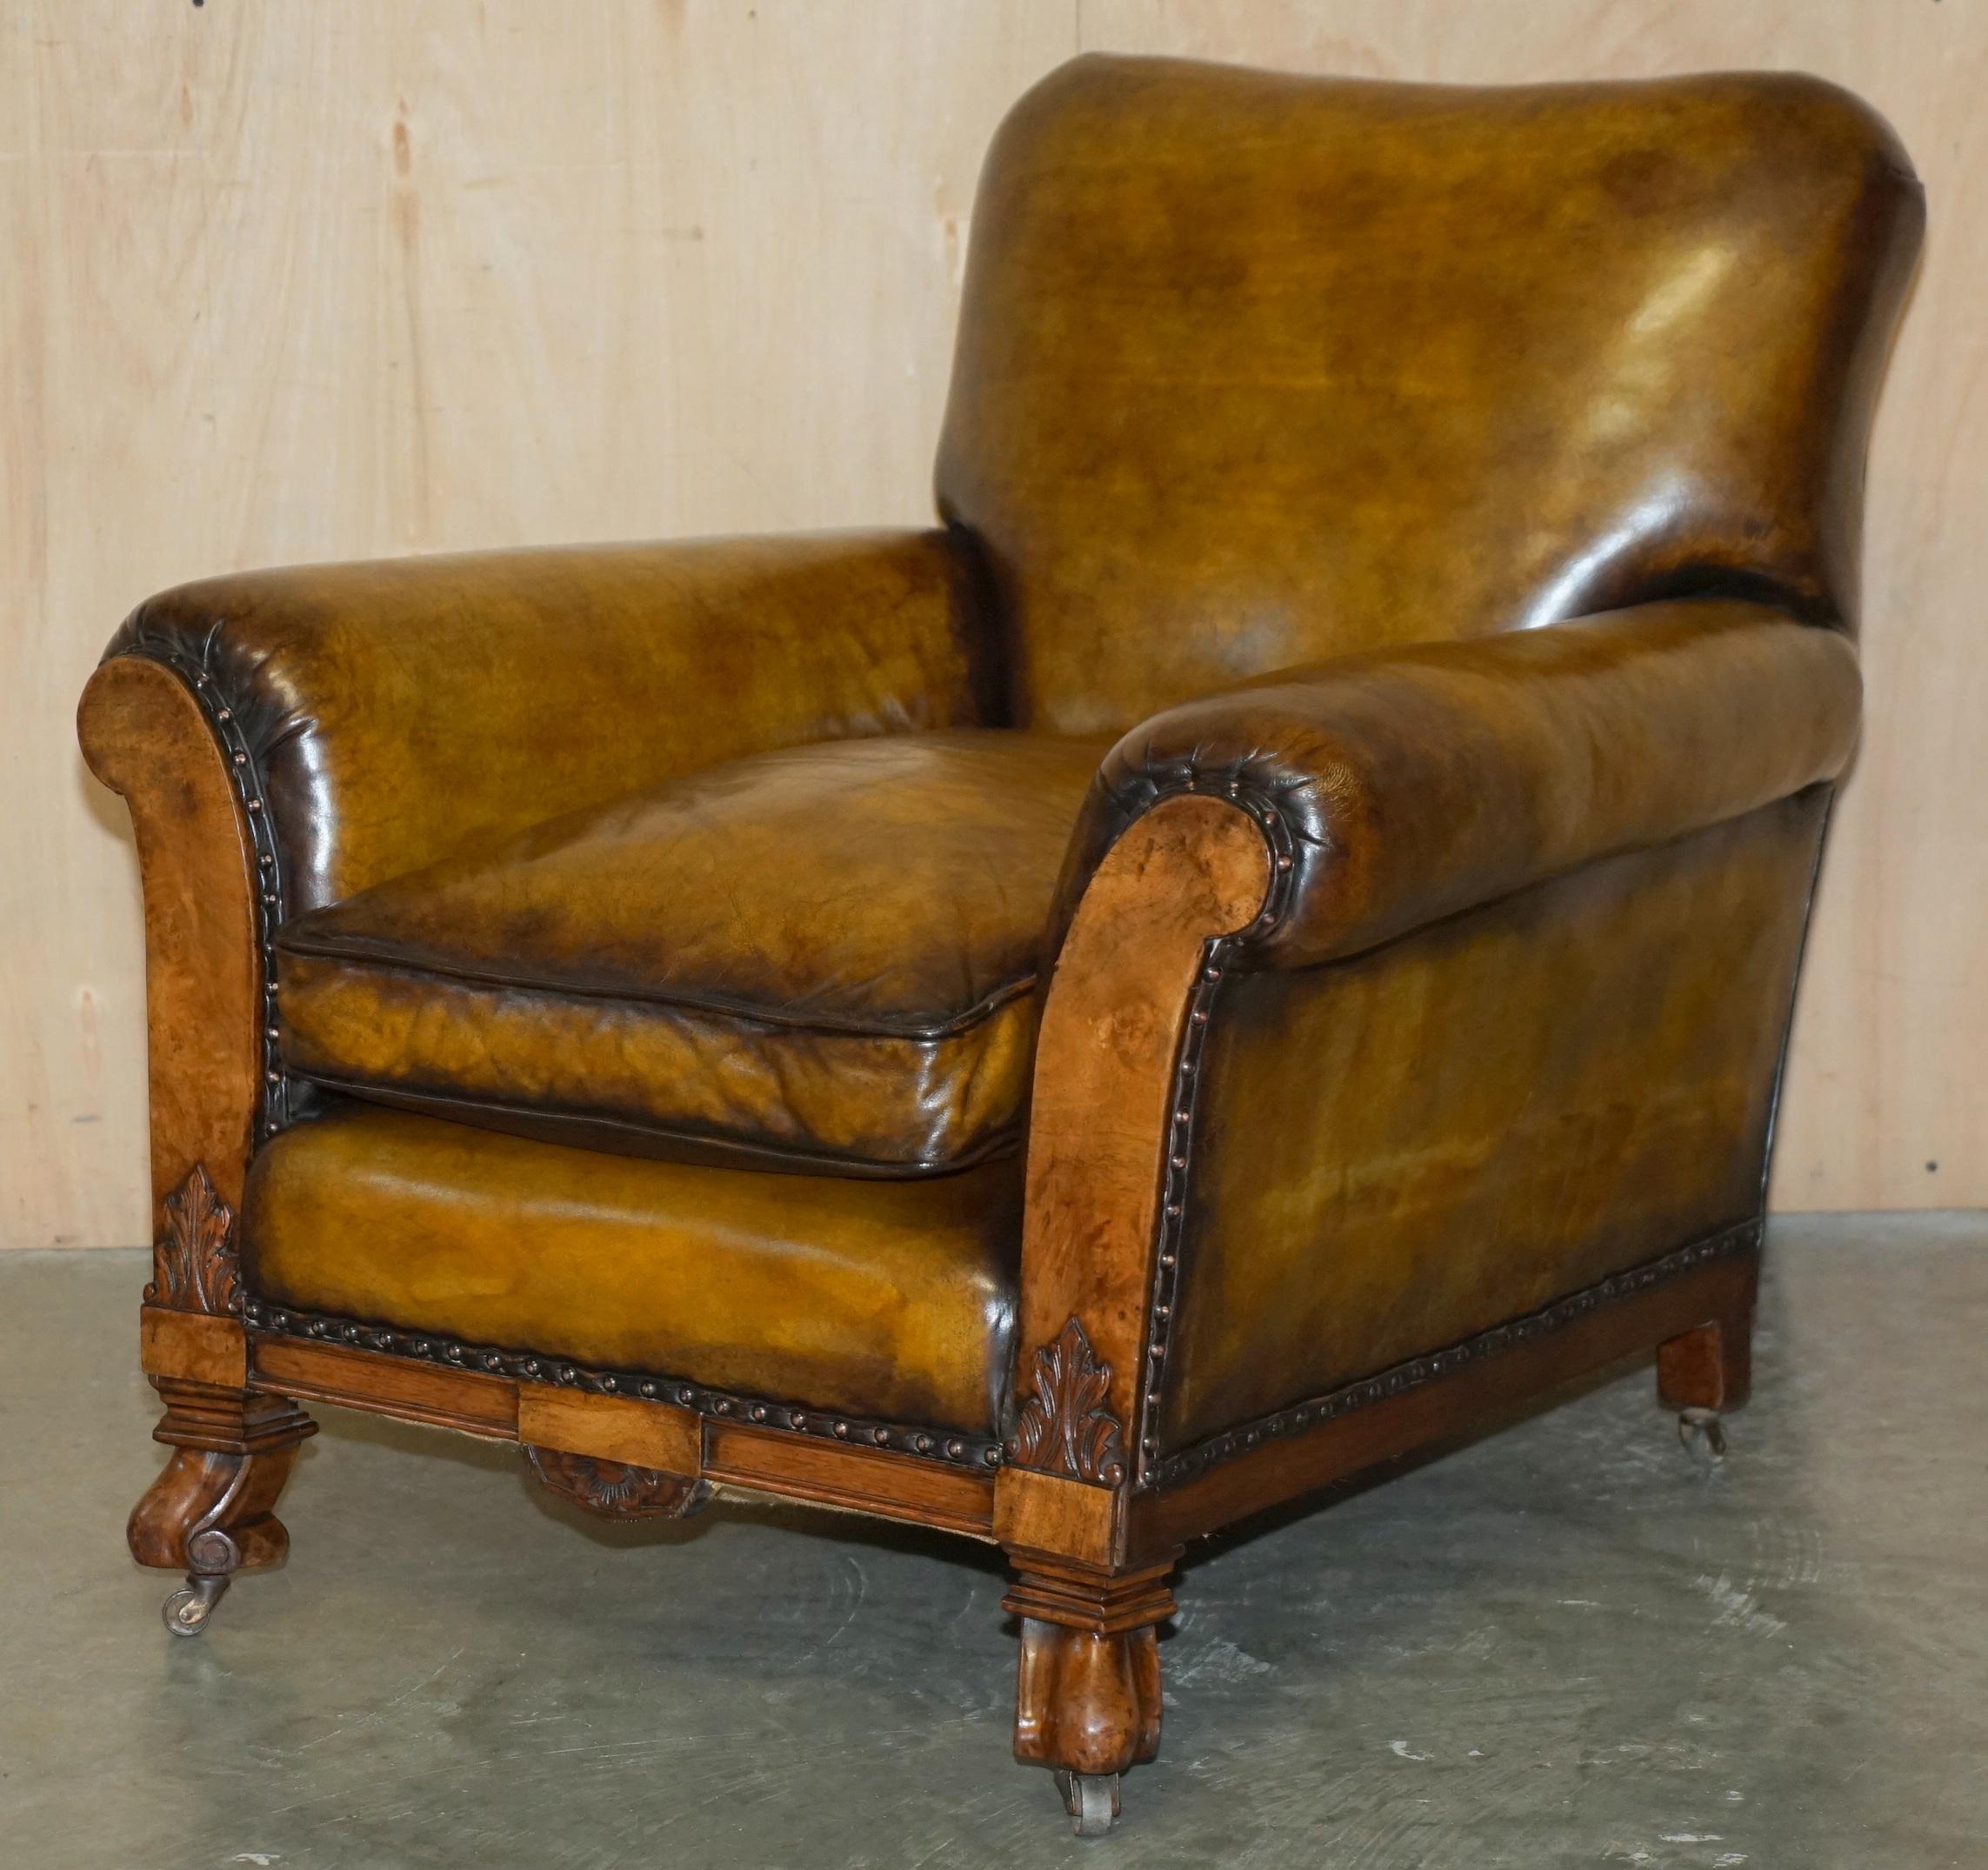 Royal House Antiques

Royal House Antiques is delighted to offer for sale this Important pair of Museum quality, fully restored Antique Victorian circa 1860 hand dyed Cigar brown leather armchairs with Burr Walnut caved panels 

Please note the